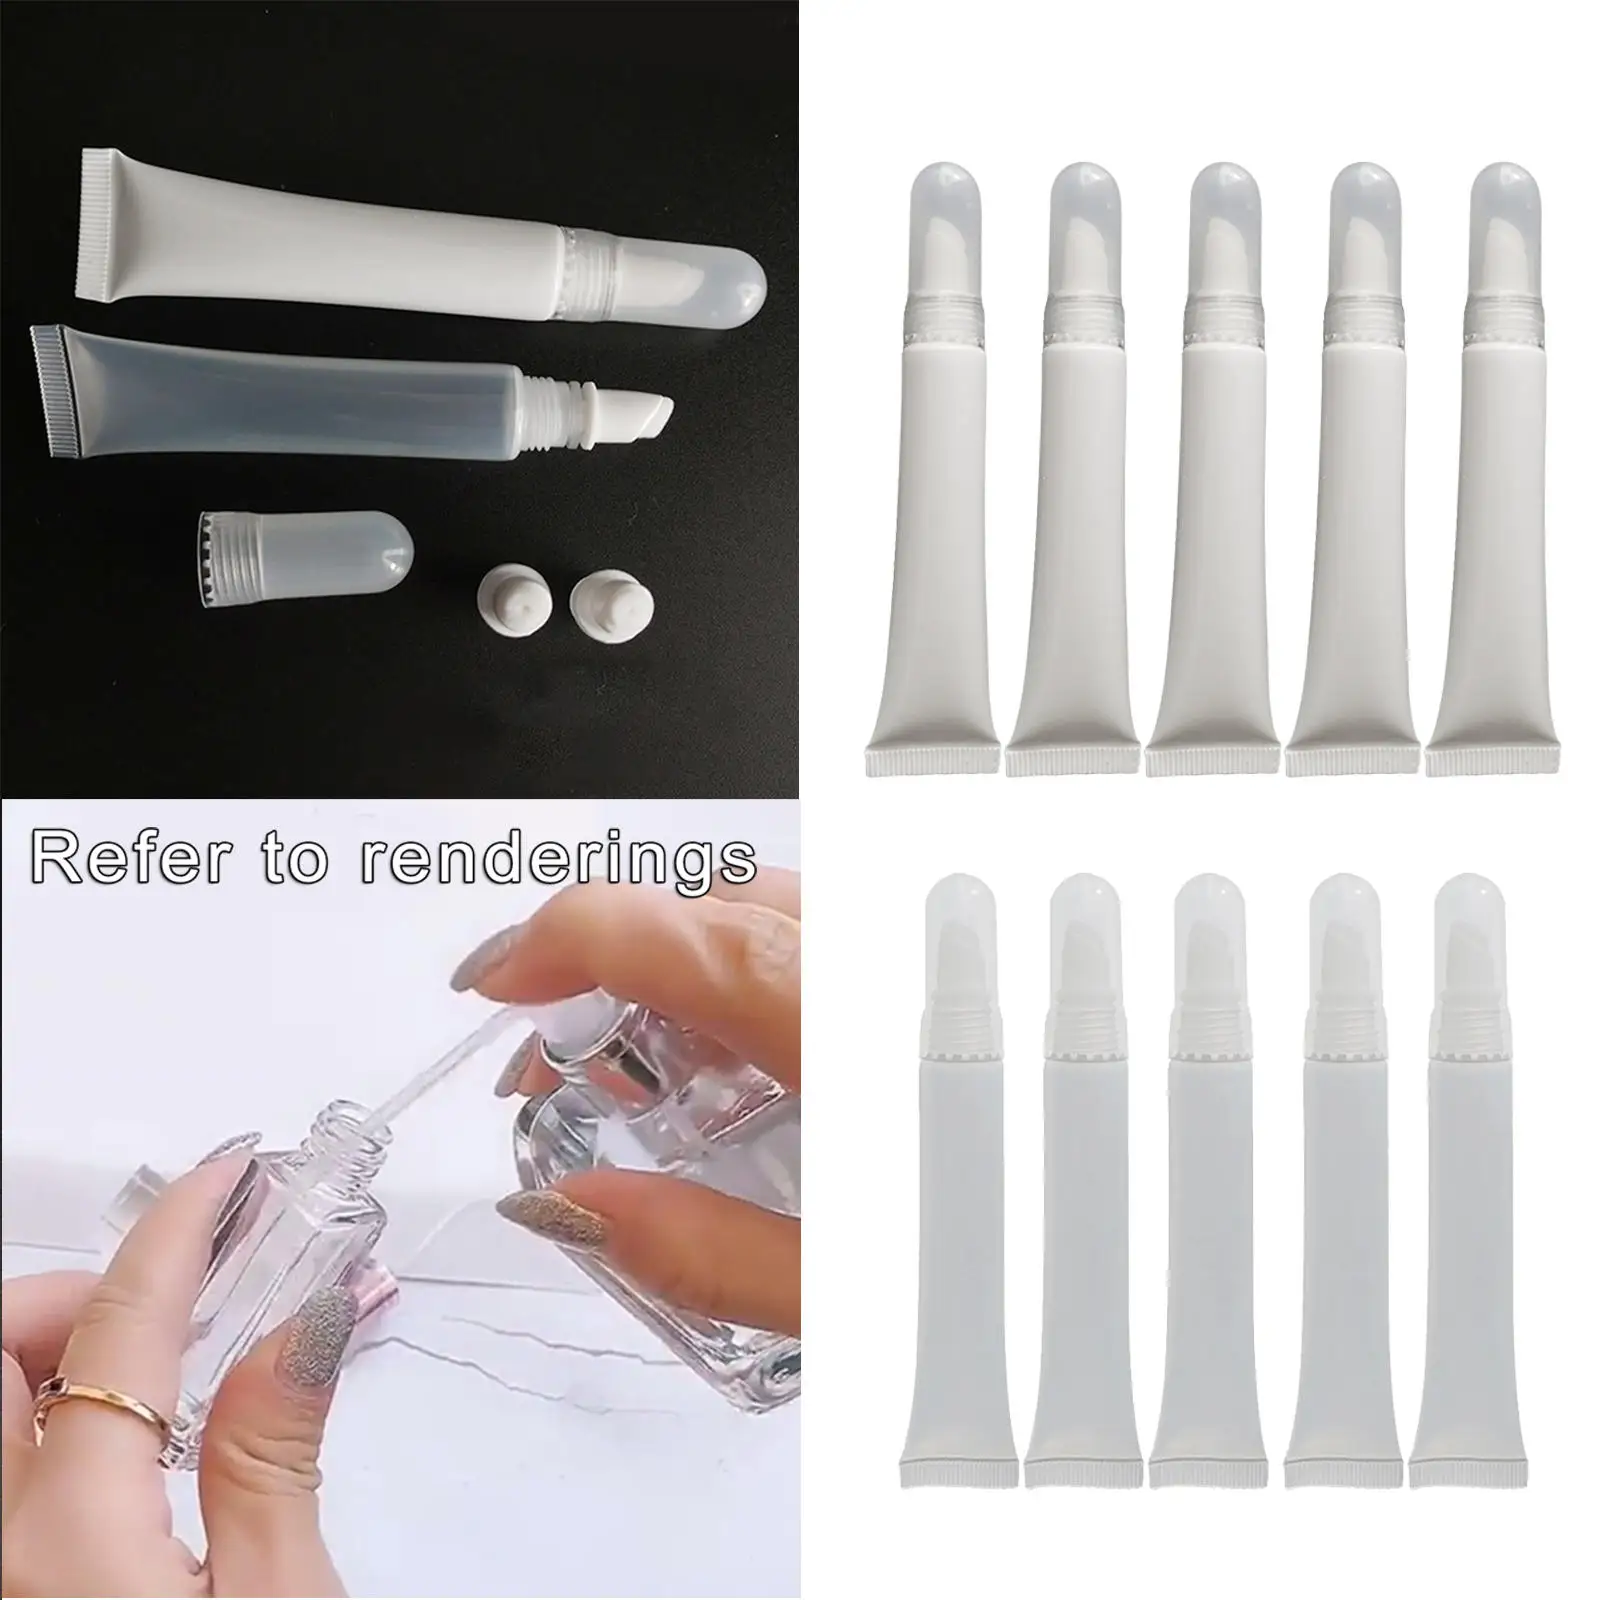 5-Pack Soft 10ml Plastic Empty Tubes Refillable Toiletry Lotion Containers for Traveling Reusable Home Use DIY Project Washable